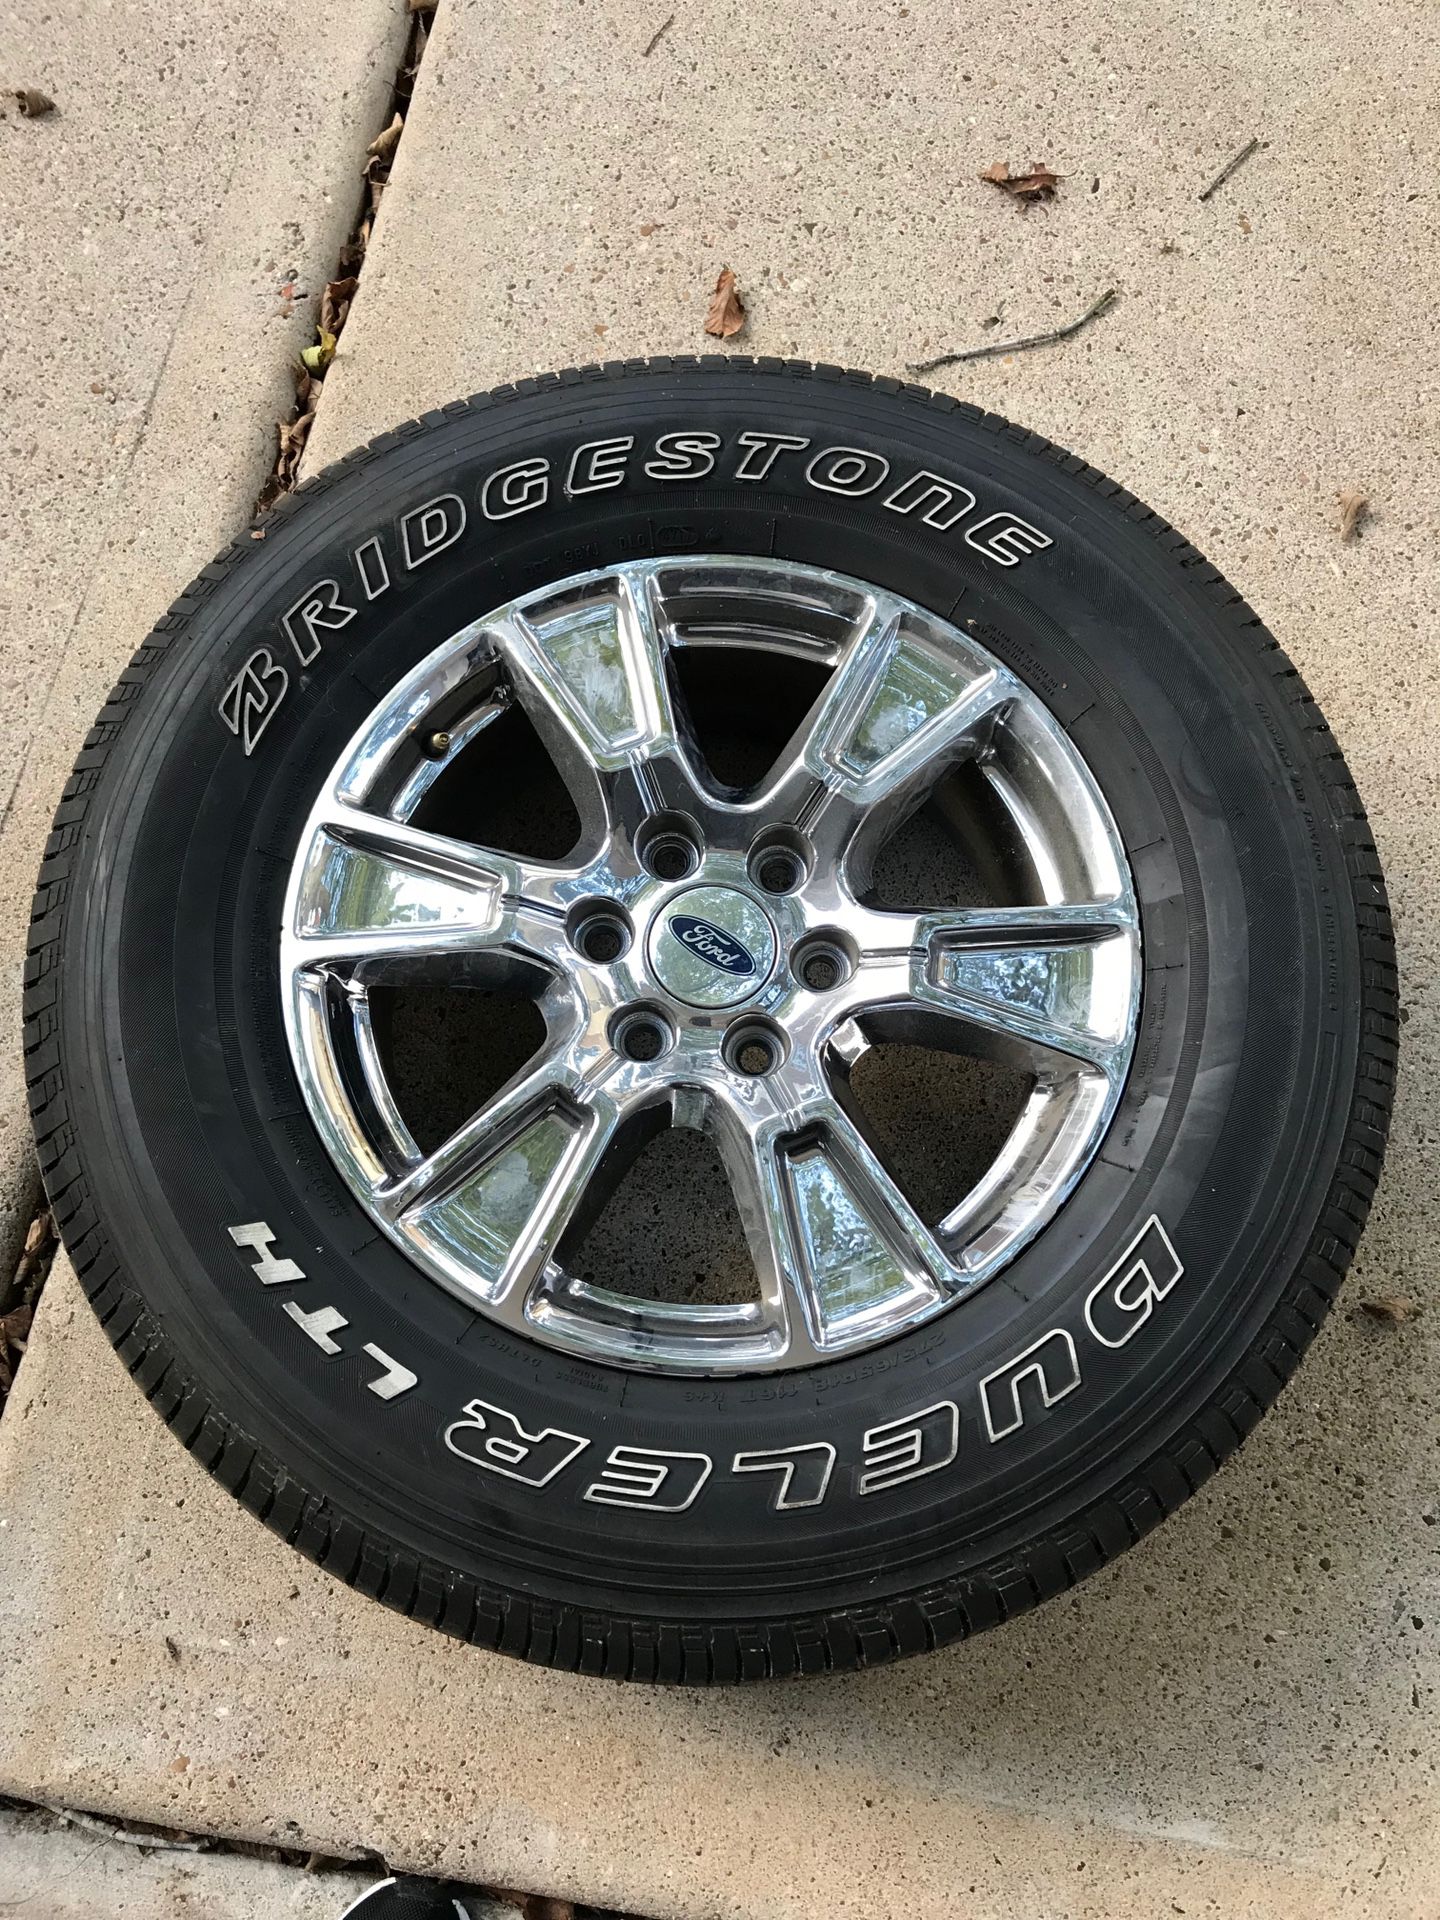 2015 Ford F-150 lariat stock tires and rims, Good Condition, hardly driven on.